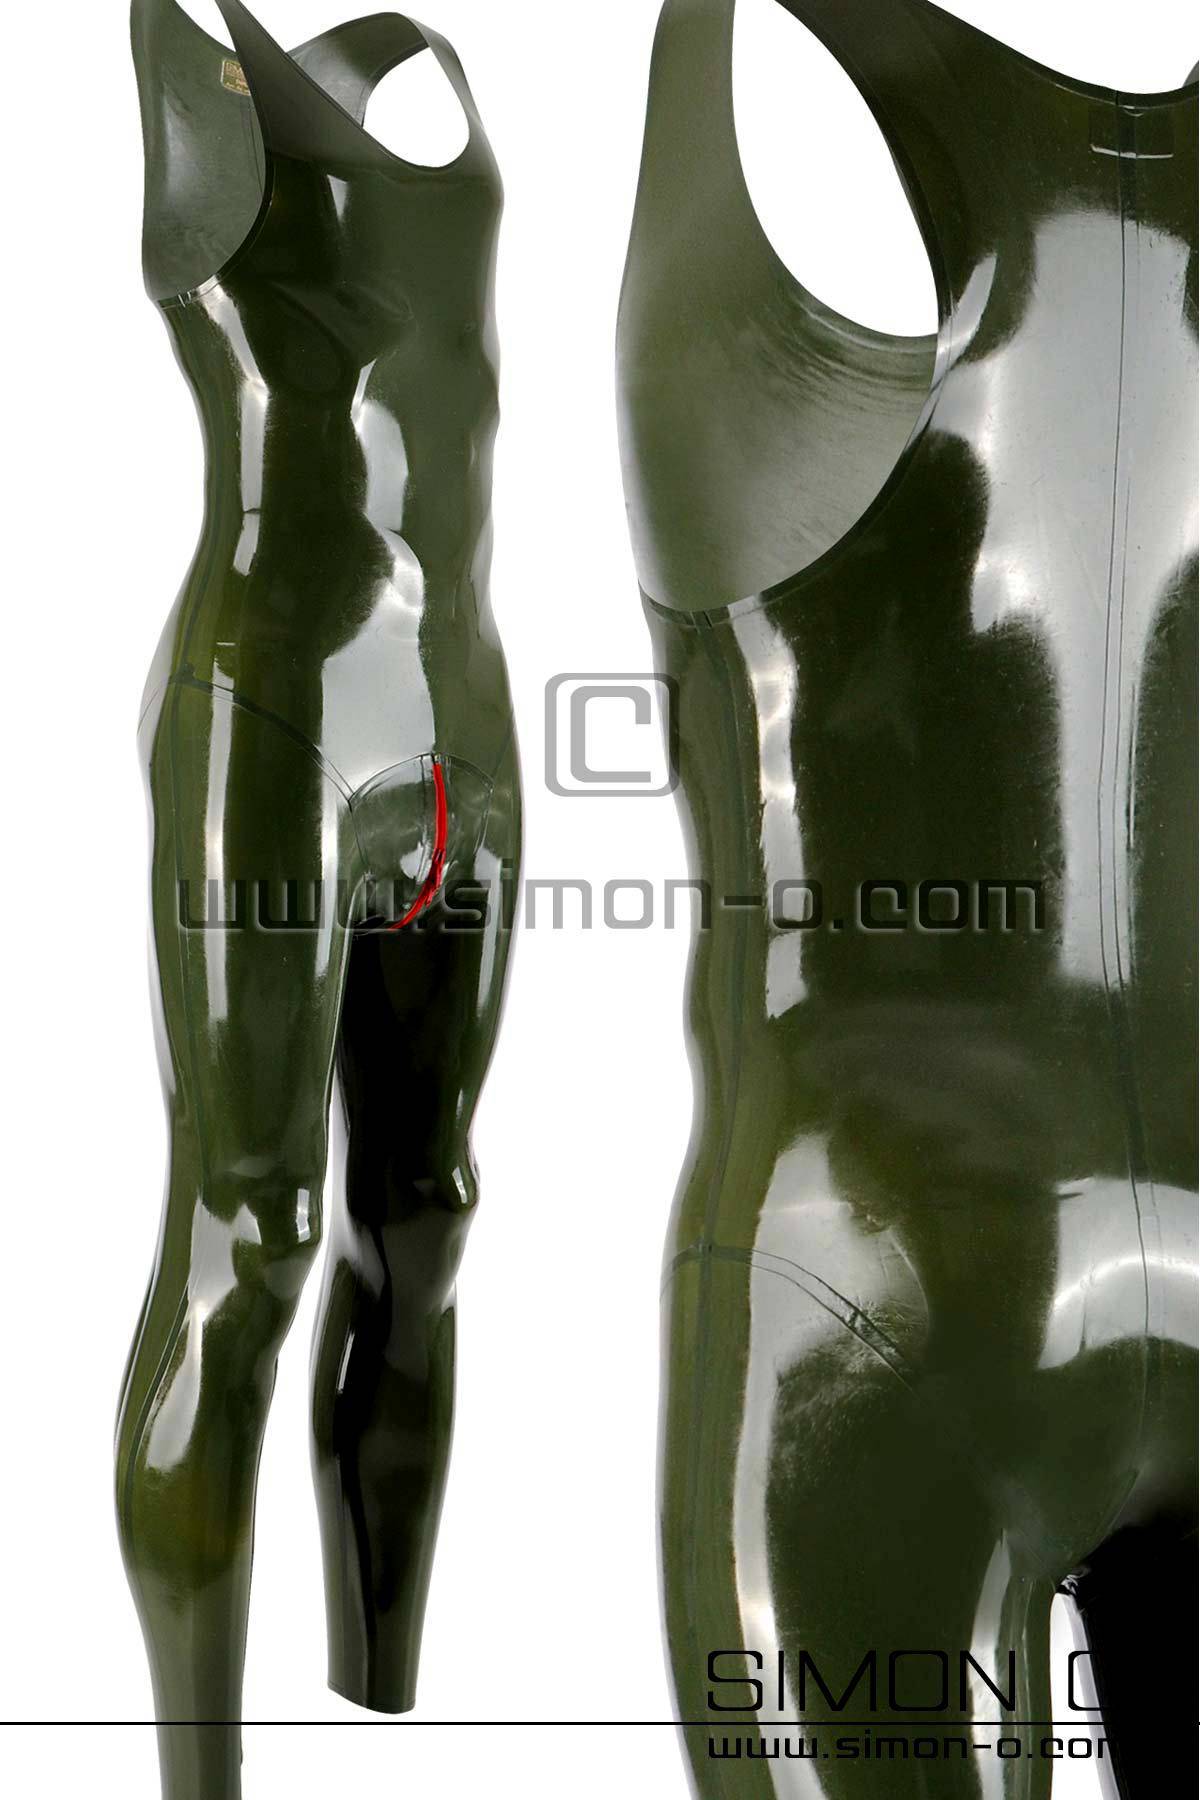 Sleeveless Latex suit with round neckline in olive green for men with zipper in the crotch